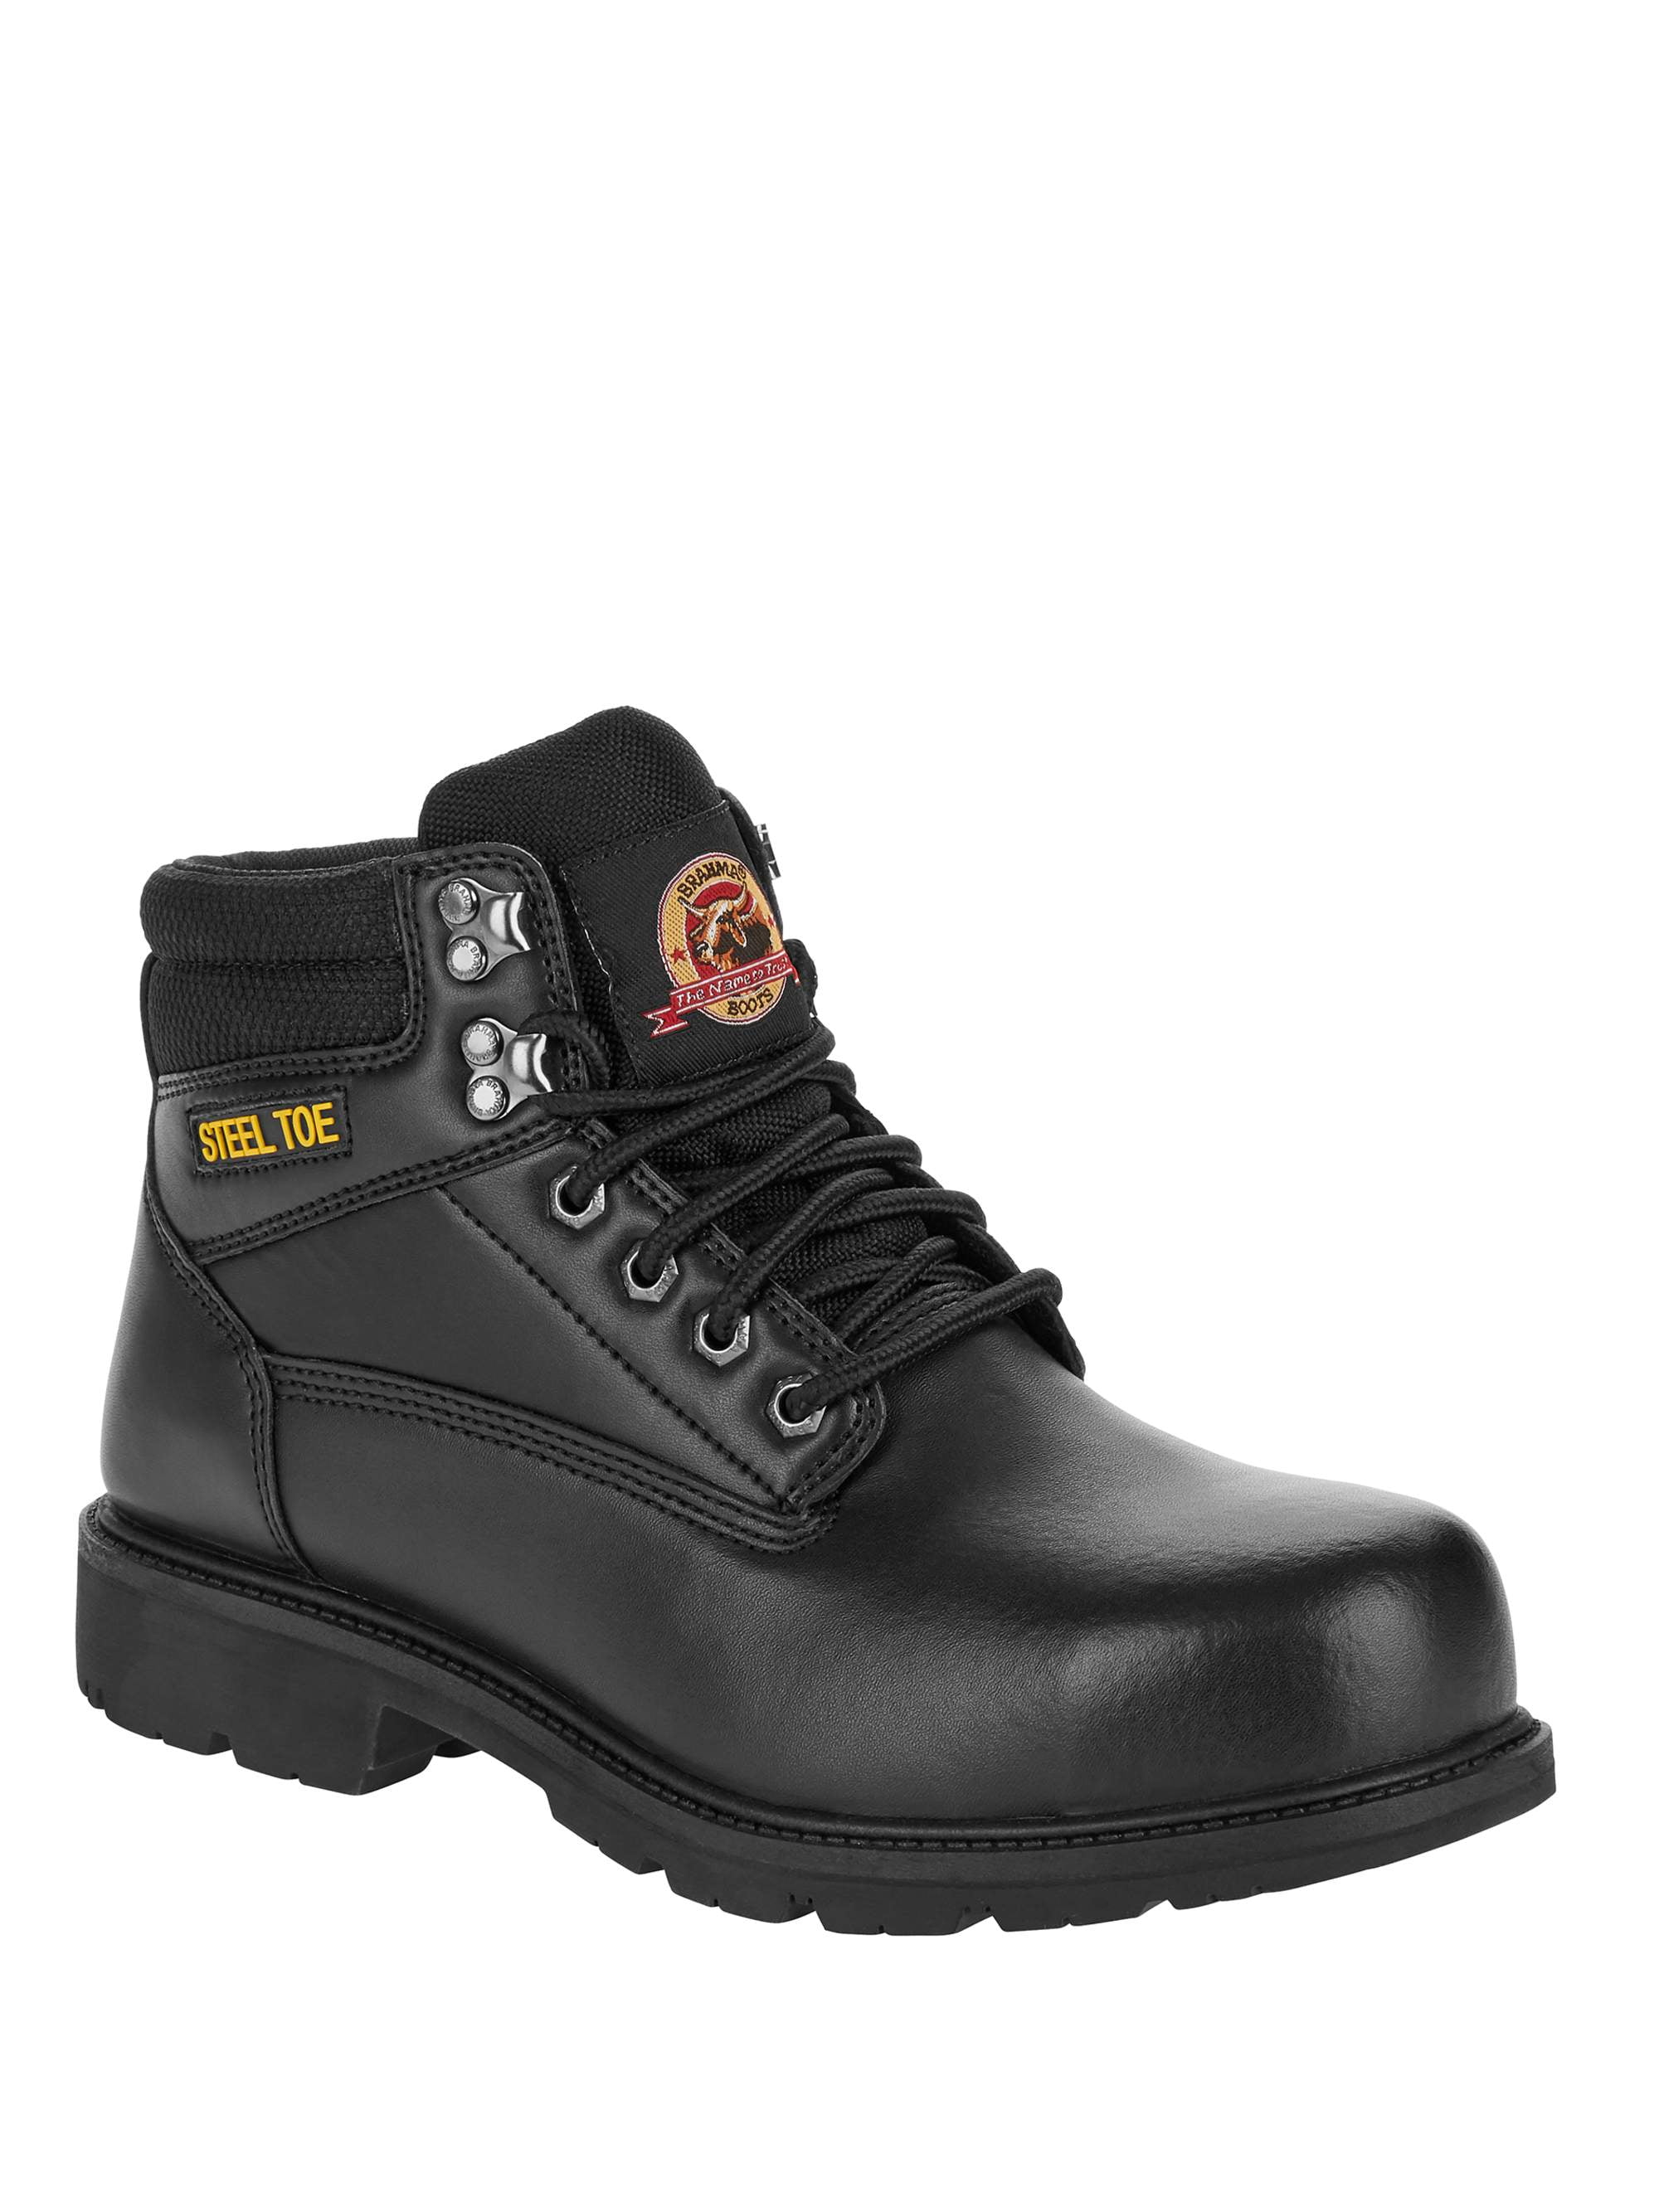 Size 14 West Chester 8350 14 PVC Steel Toe Boot Black 